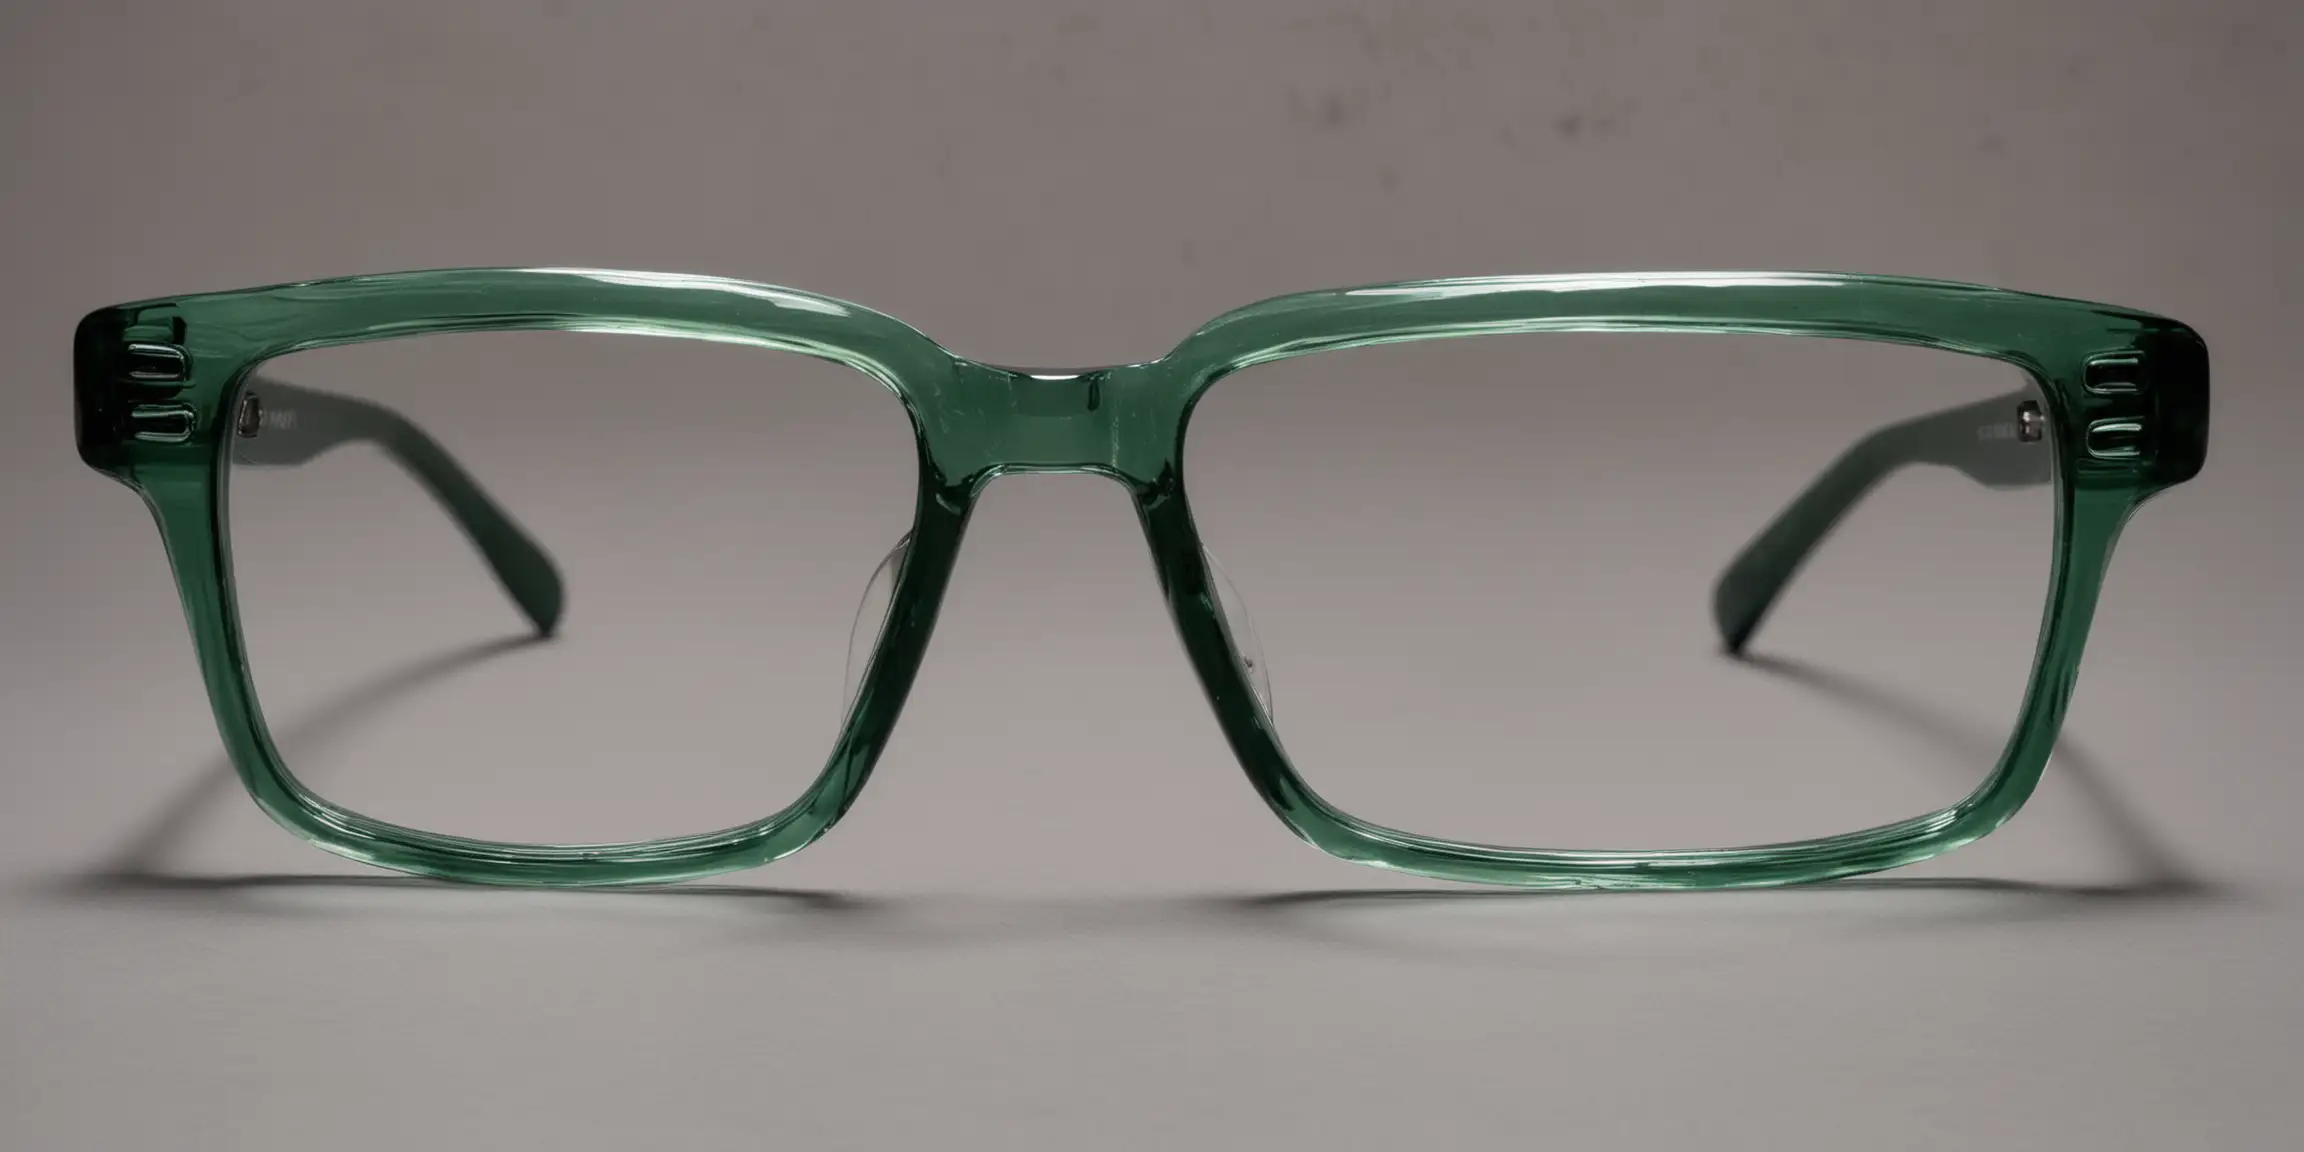 Person Wearing Stylish Green Glasses with Black Lenses